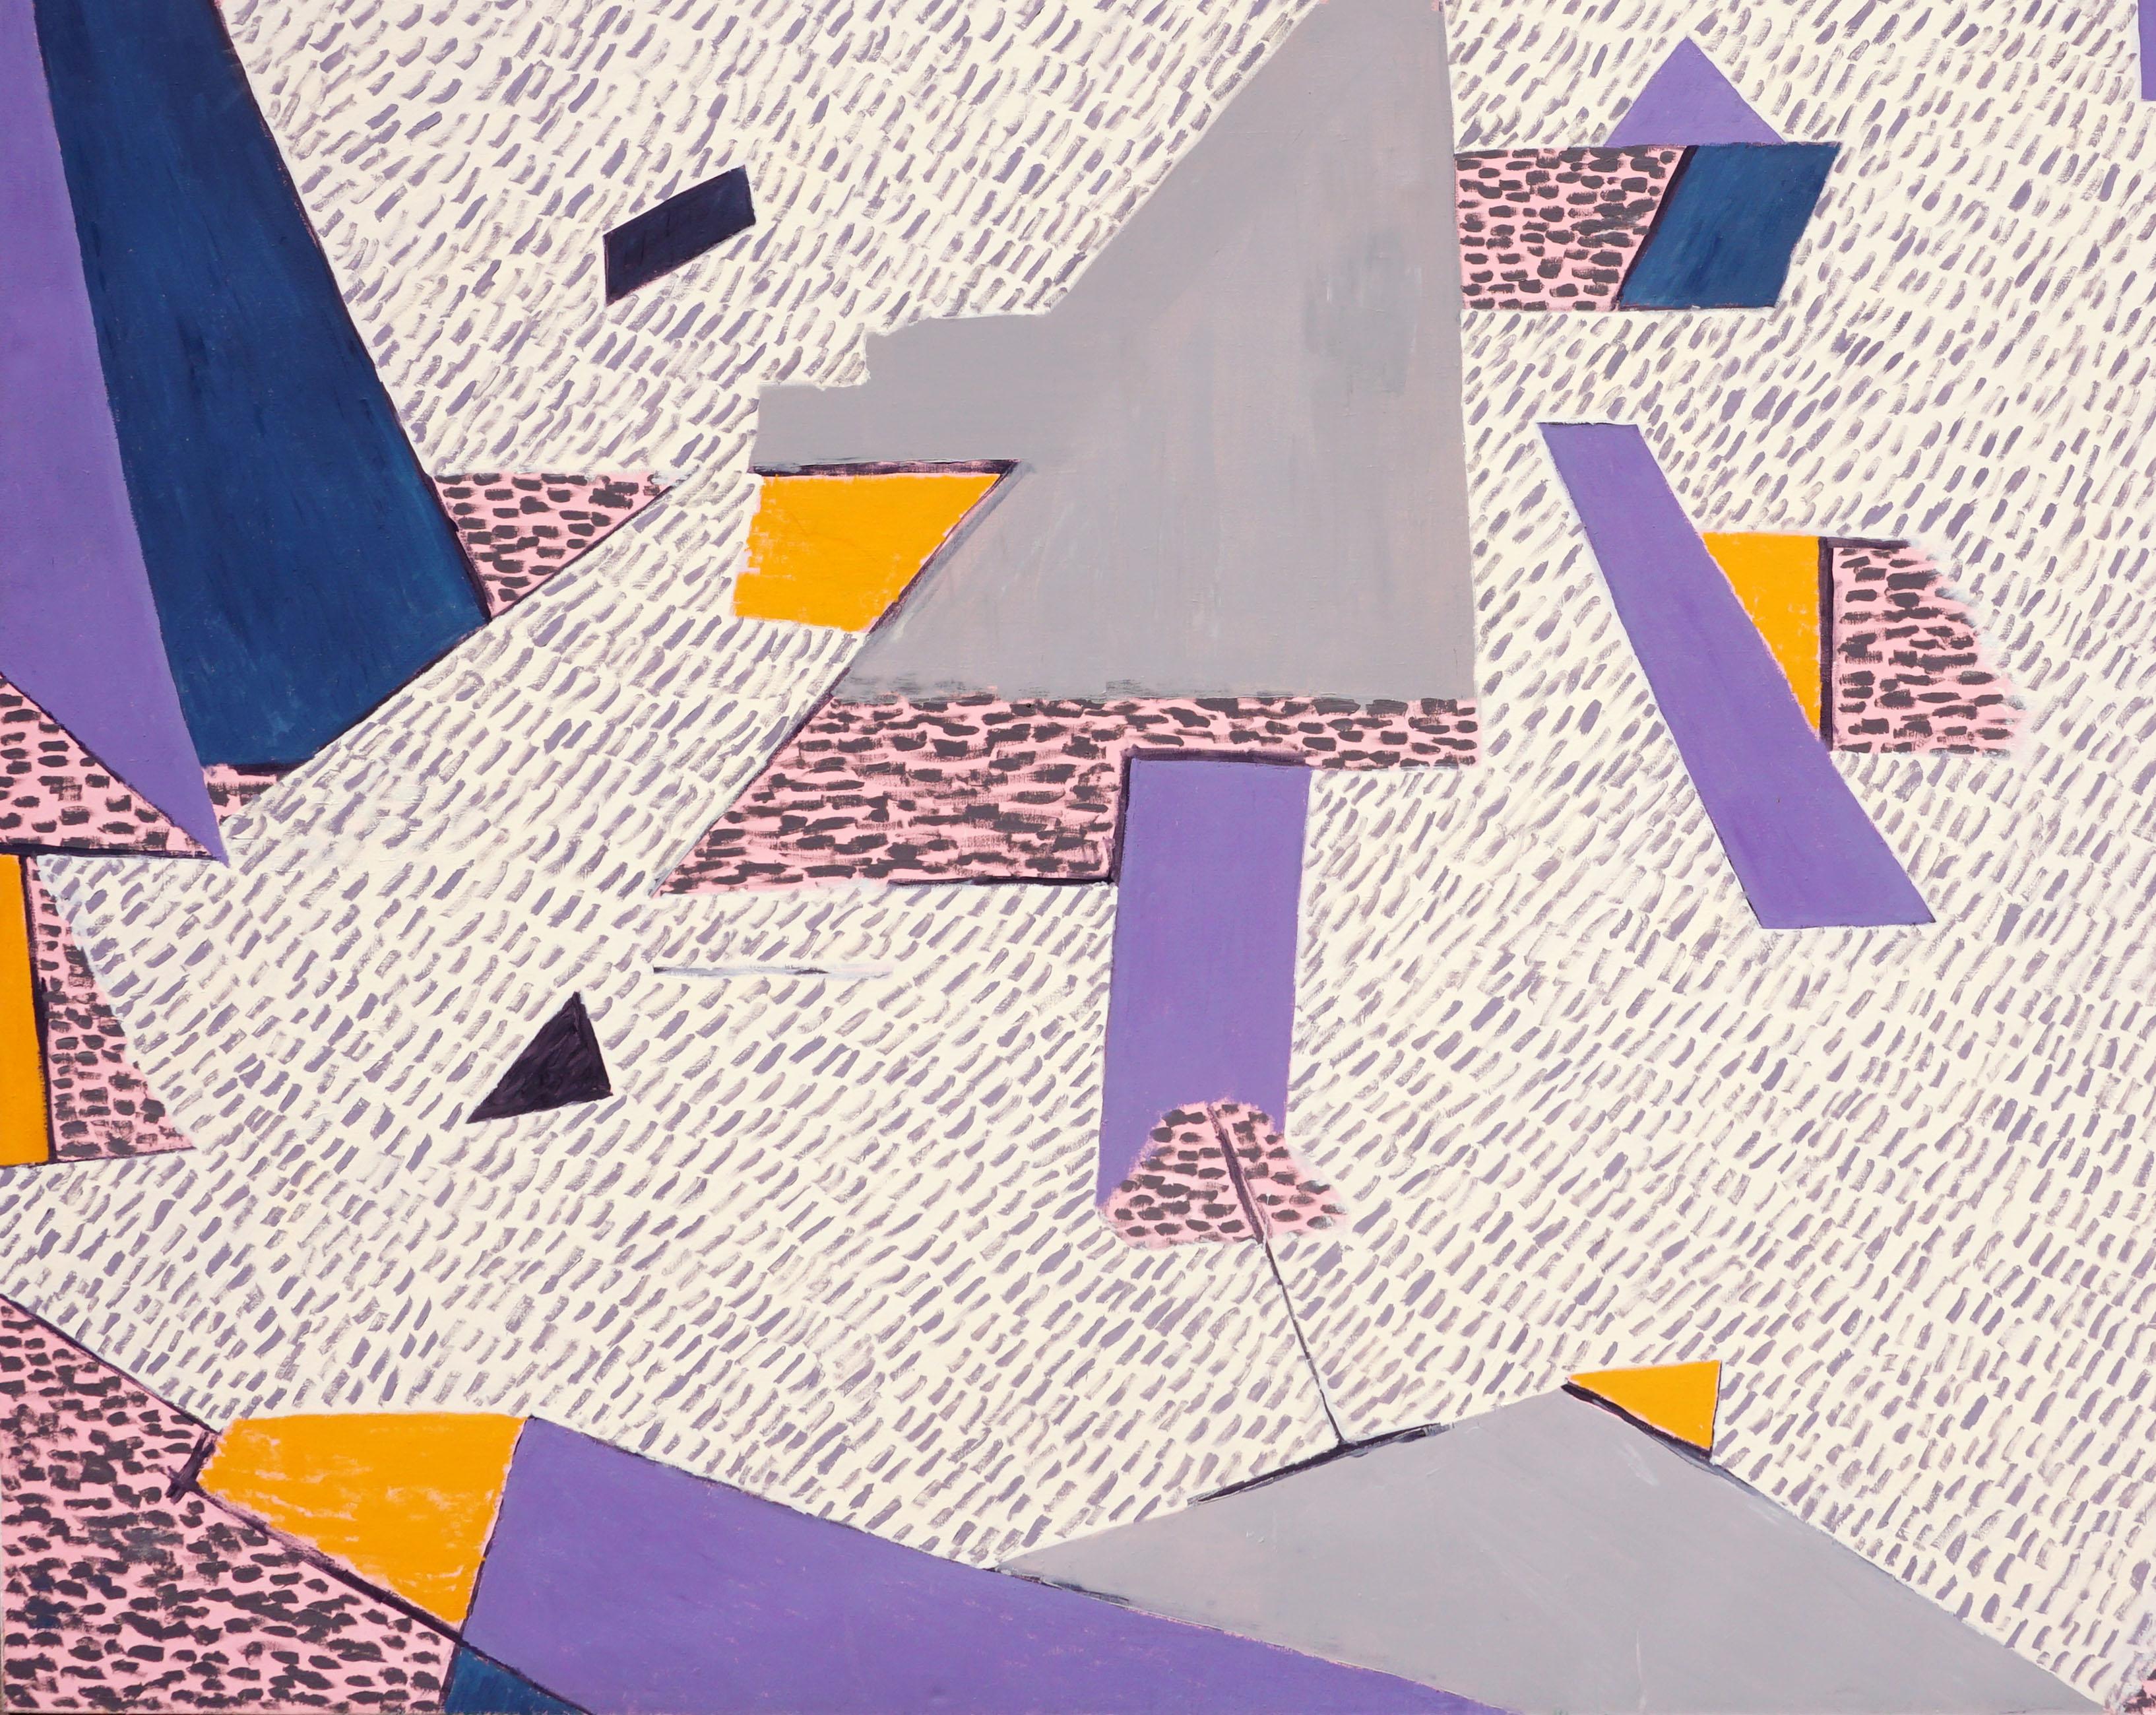 Large-Scale Contemporary Abstract Geometric with Purple, Yellow & Gray  - Painting by Michael Pauker 